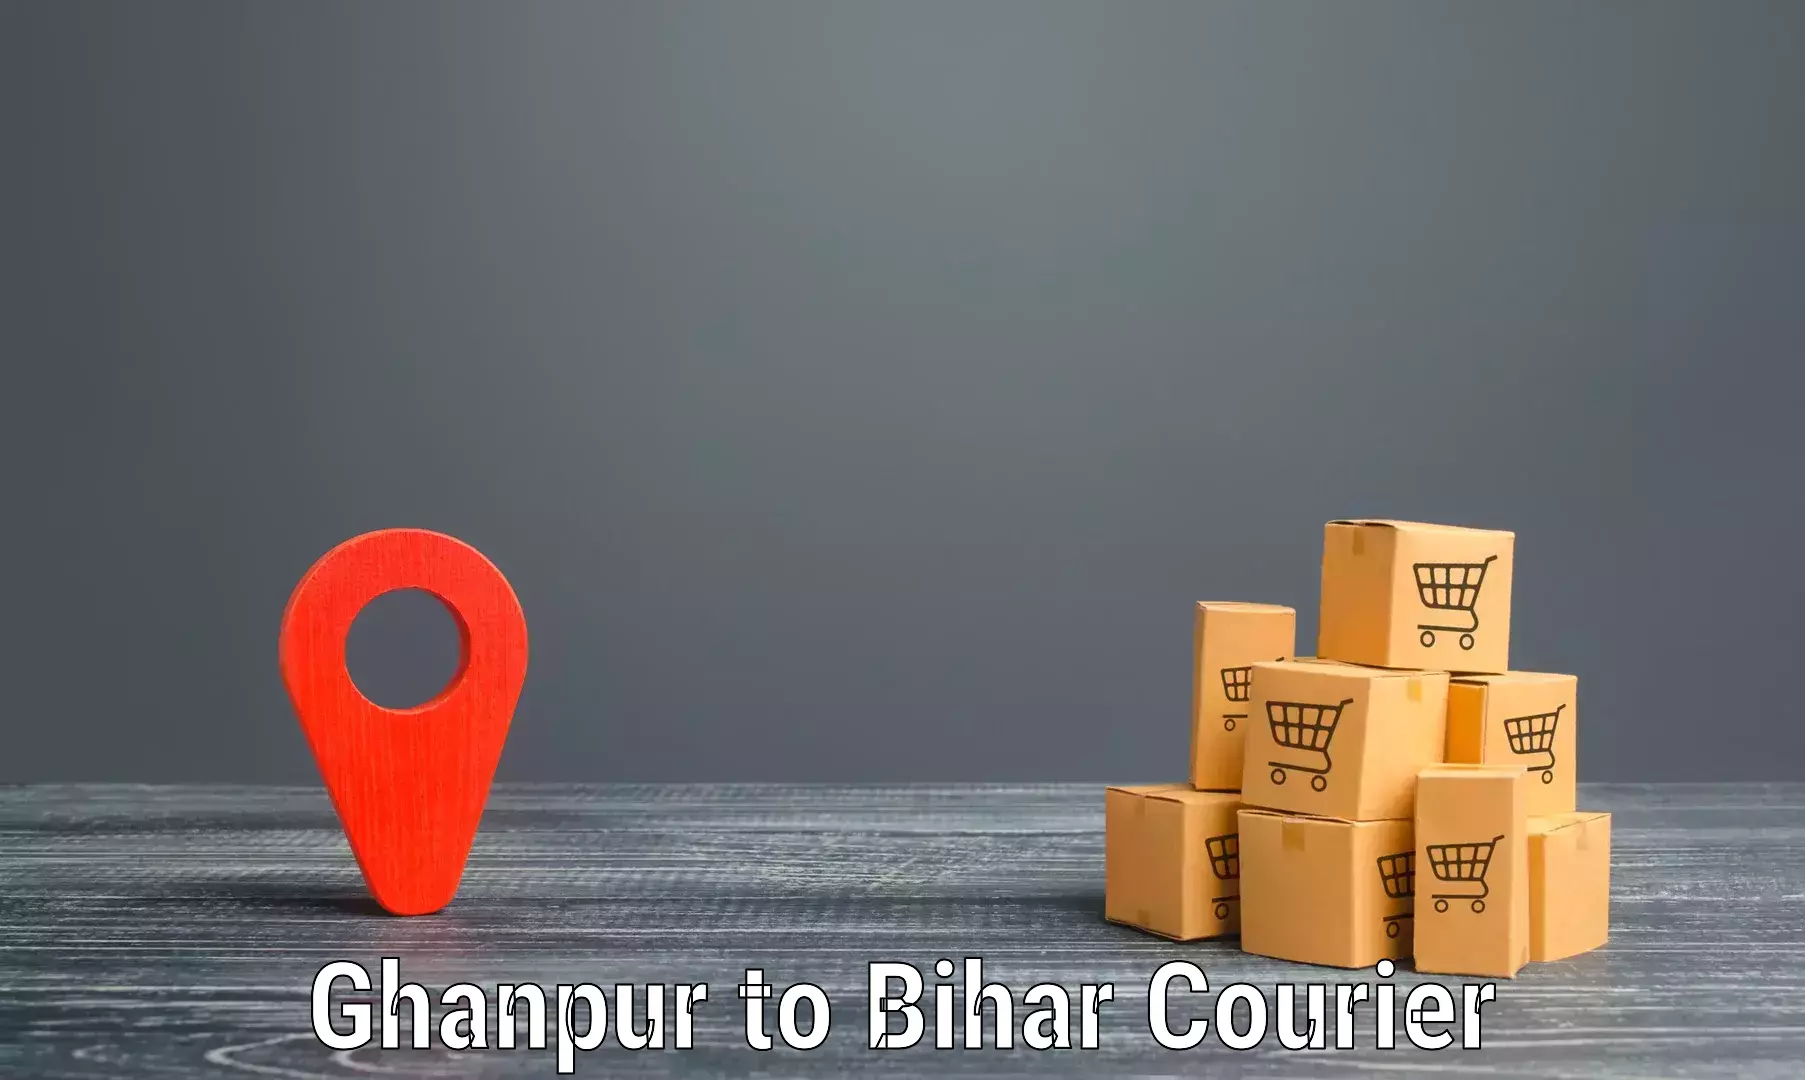 On-call courier service Ghanpur to Biraul